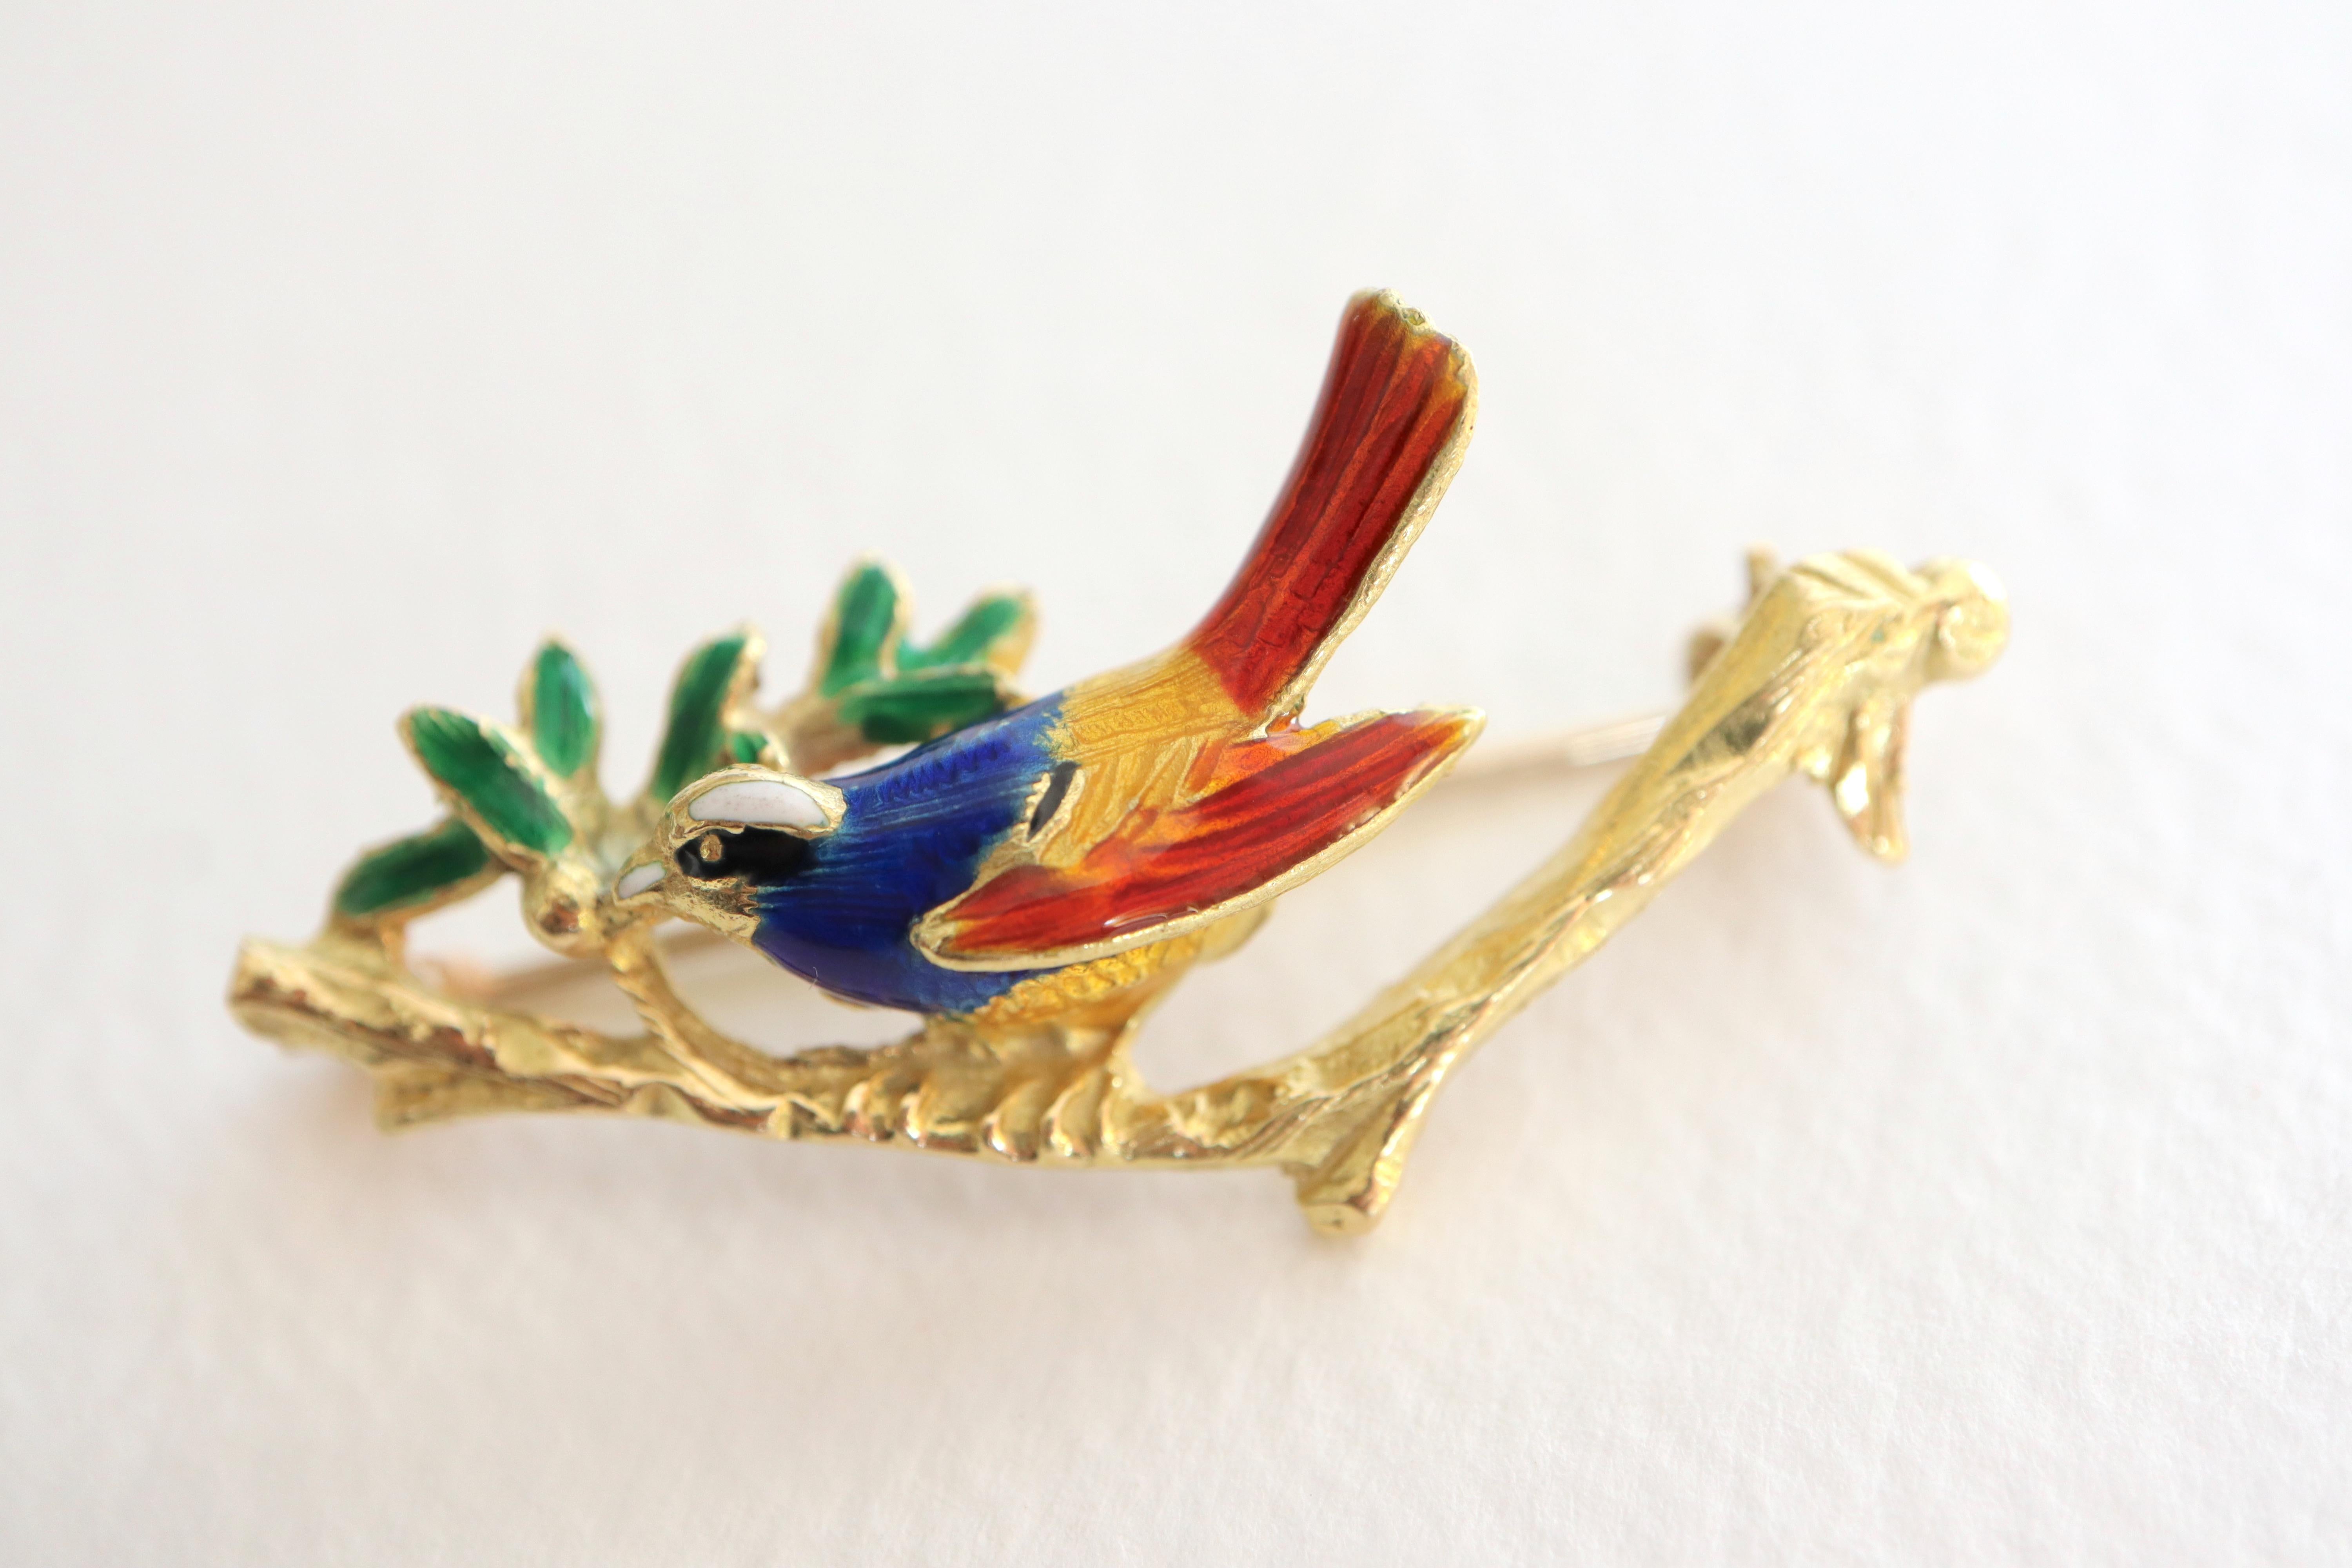 Delicate 18-carat yellow gold brooch representing a Bird on a branch
Around 1960-70. The bird and the leaves are enamelled with different colors of Enamel
French work Eagle head hallmark for 18 carats Yellow Gold
Signed FOMA and numbered
Gross